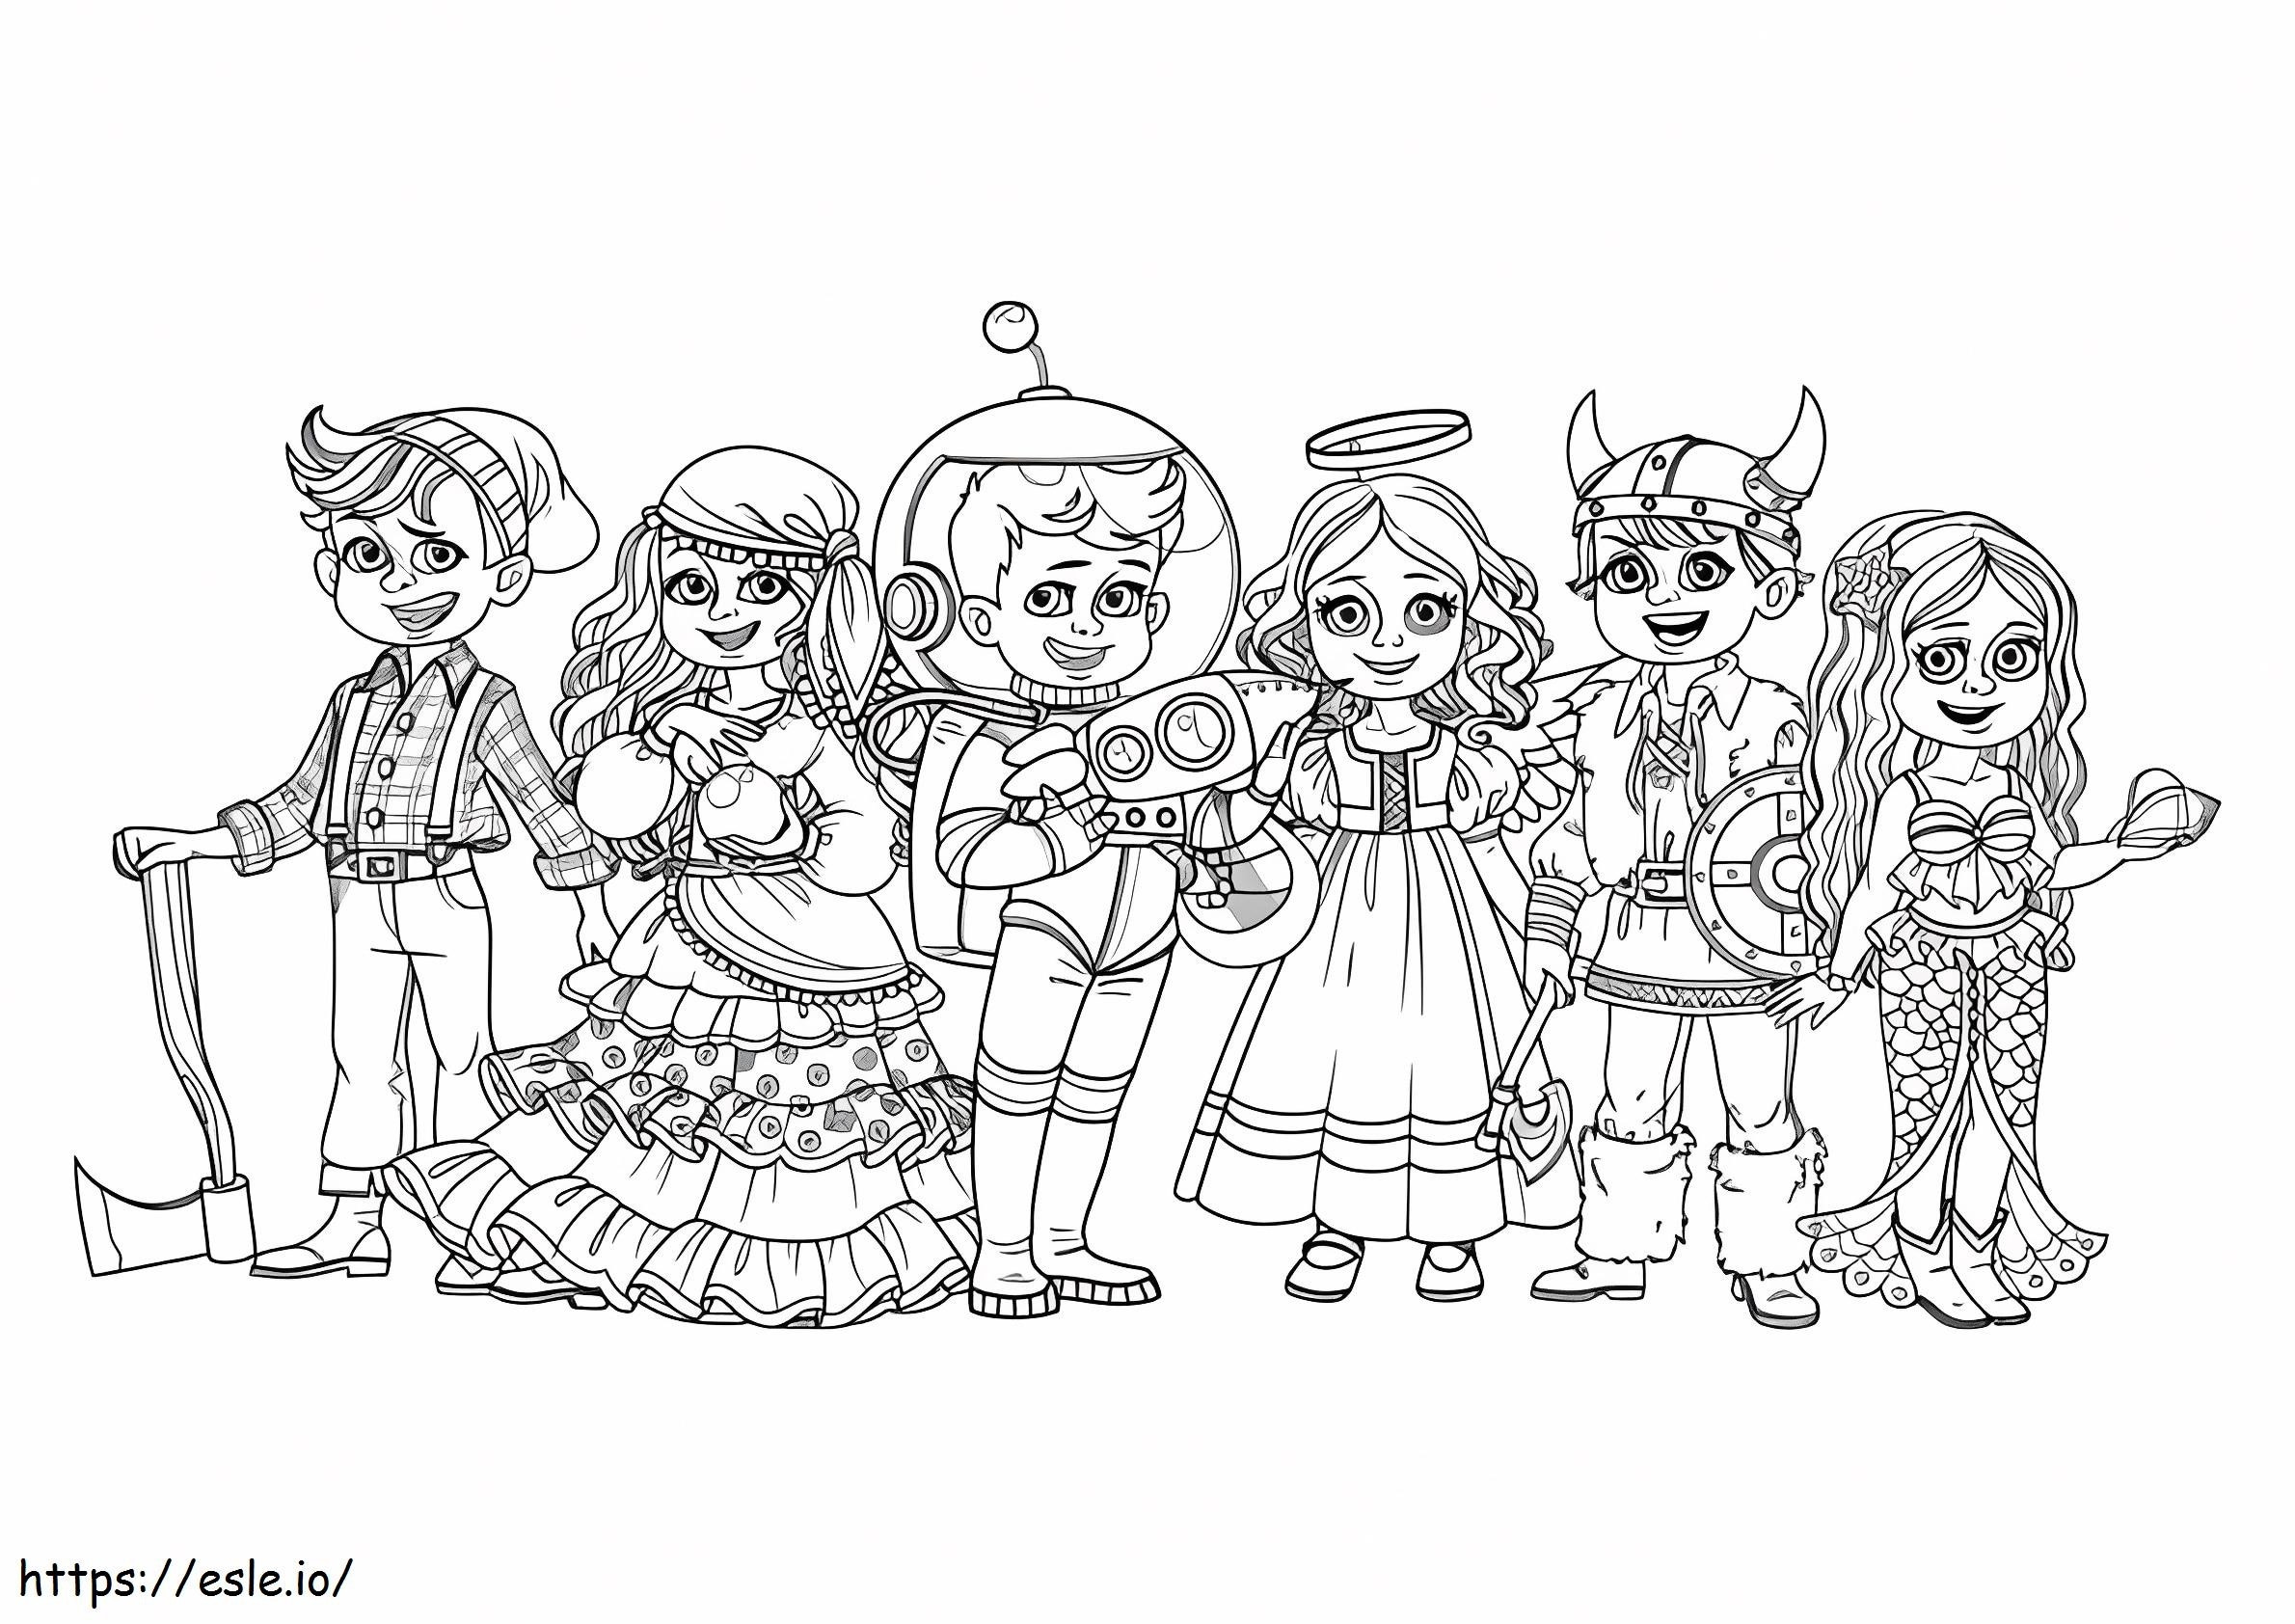 Carnival Costume Ideas coloring page